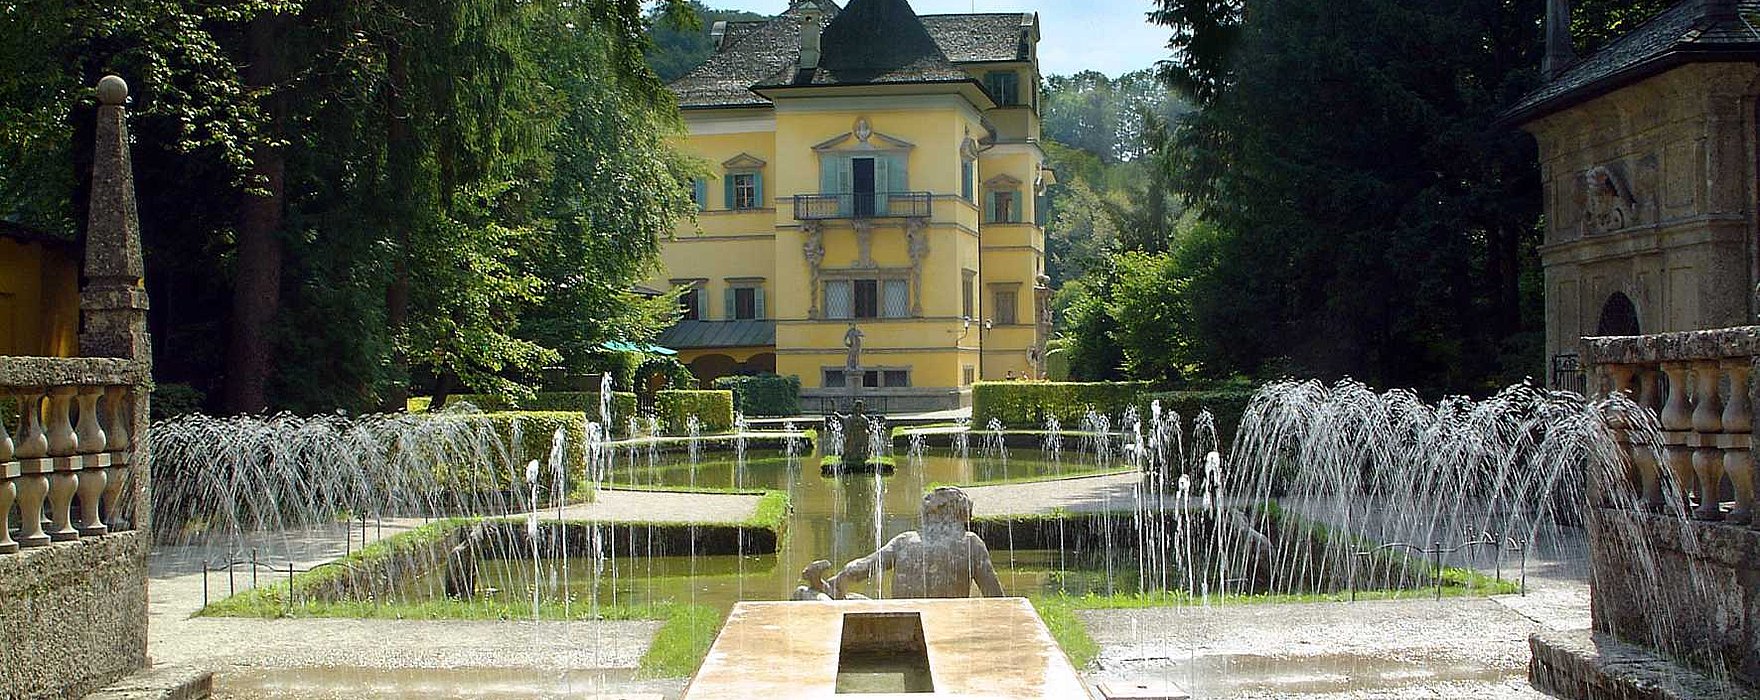 Hellbrunn Palace & Trick Fountains - View of the Prince's Table with the Palace in the Background